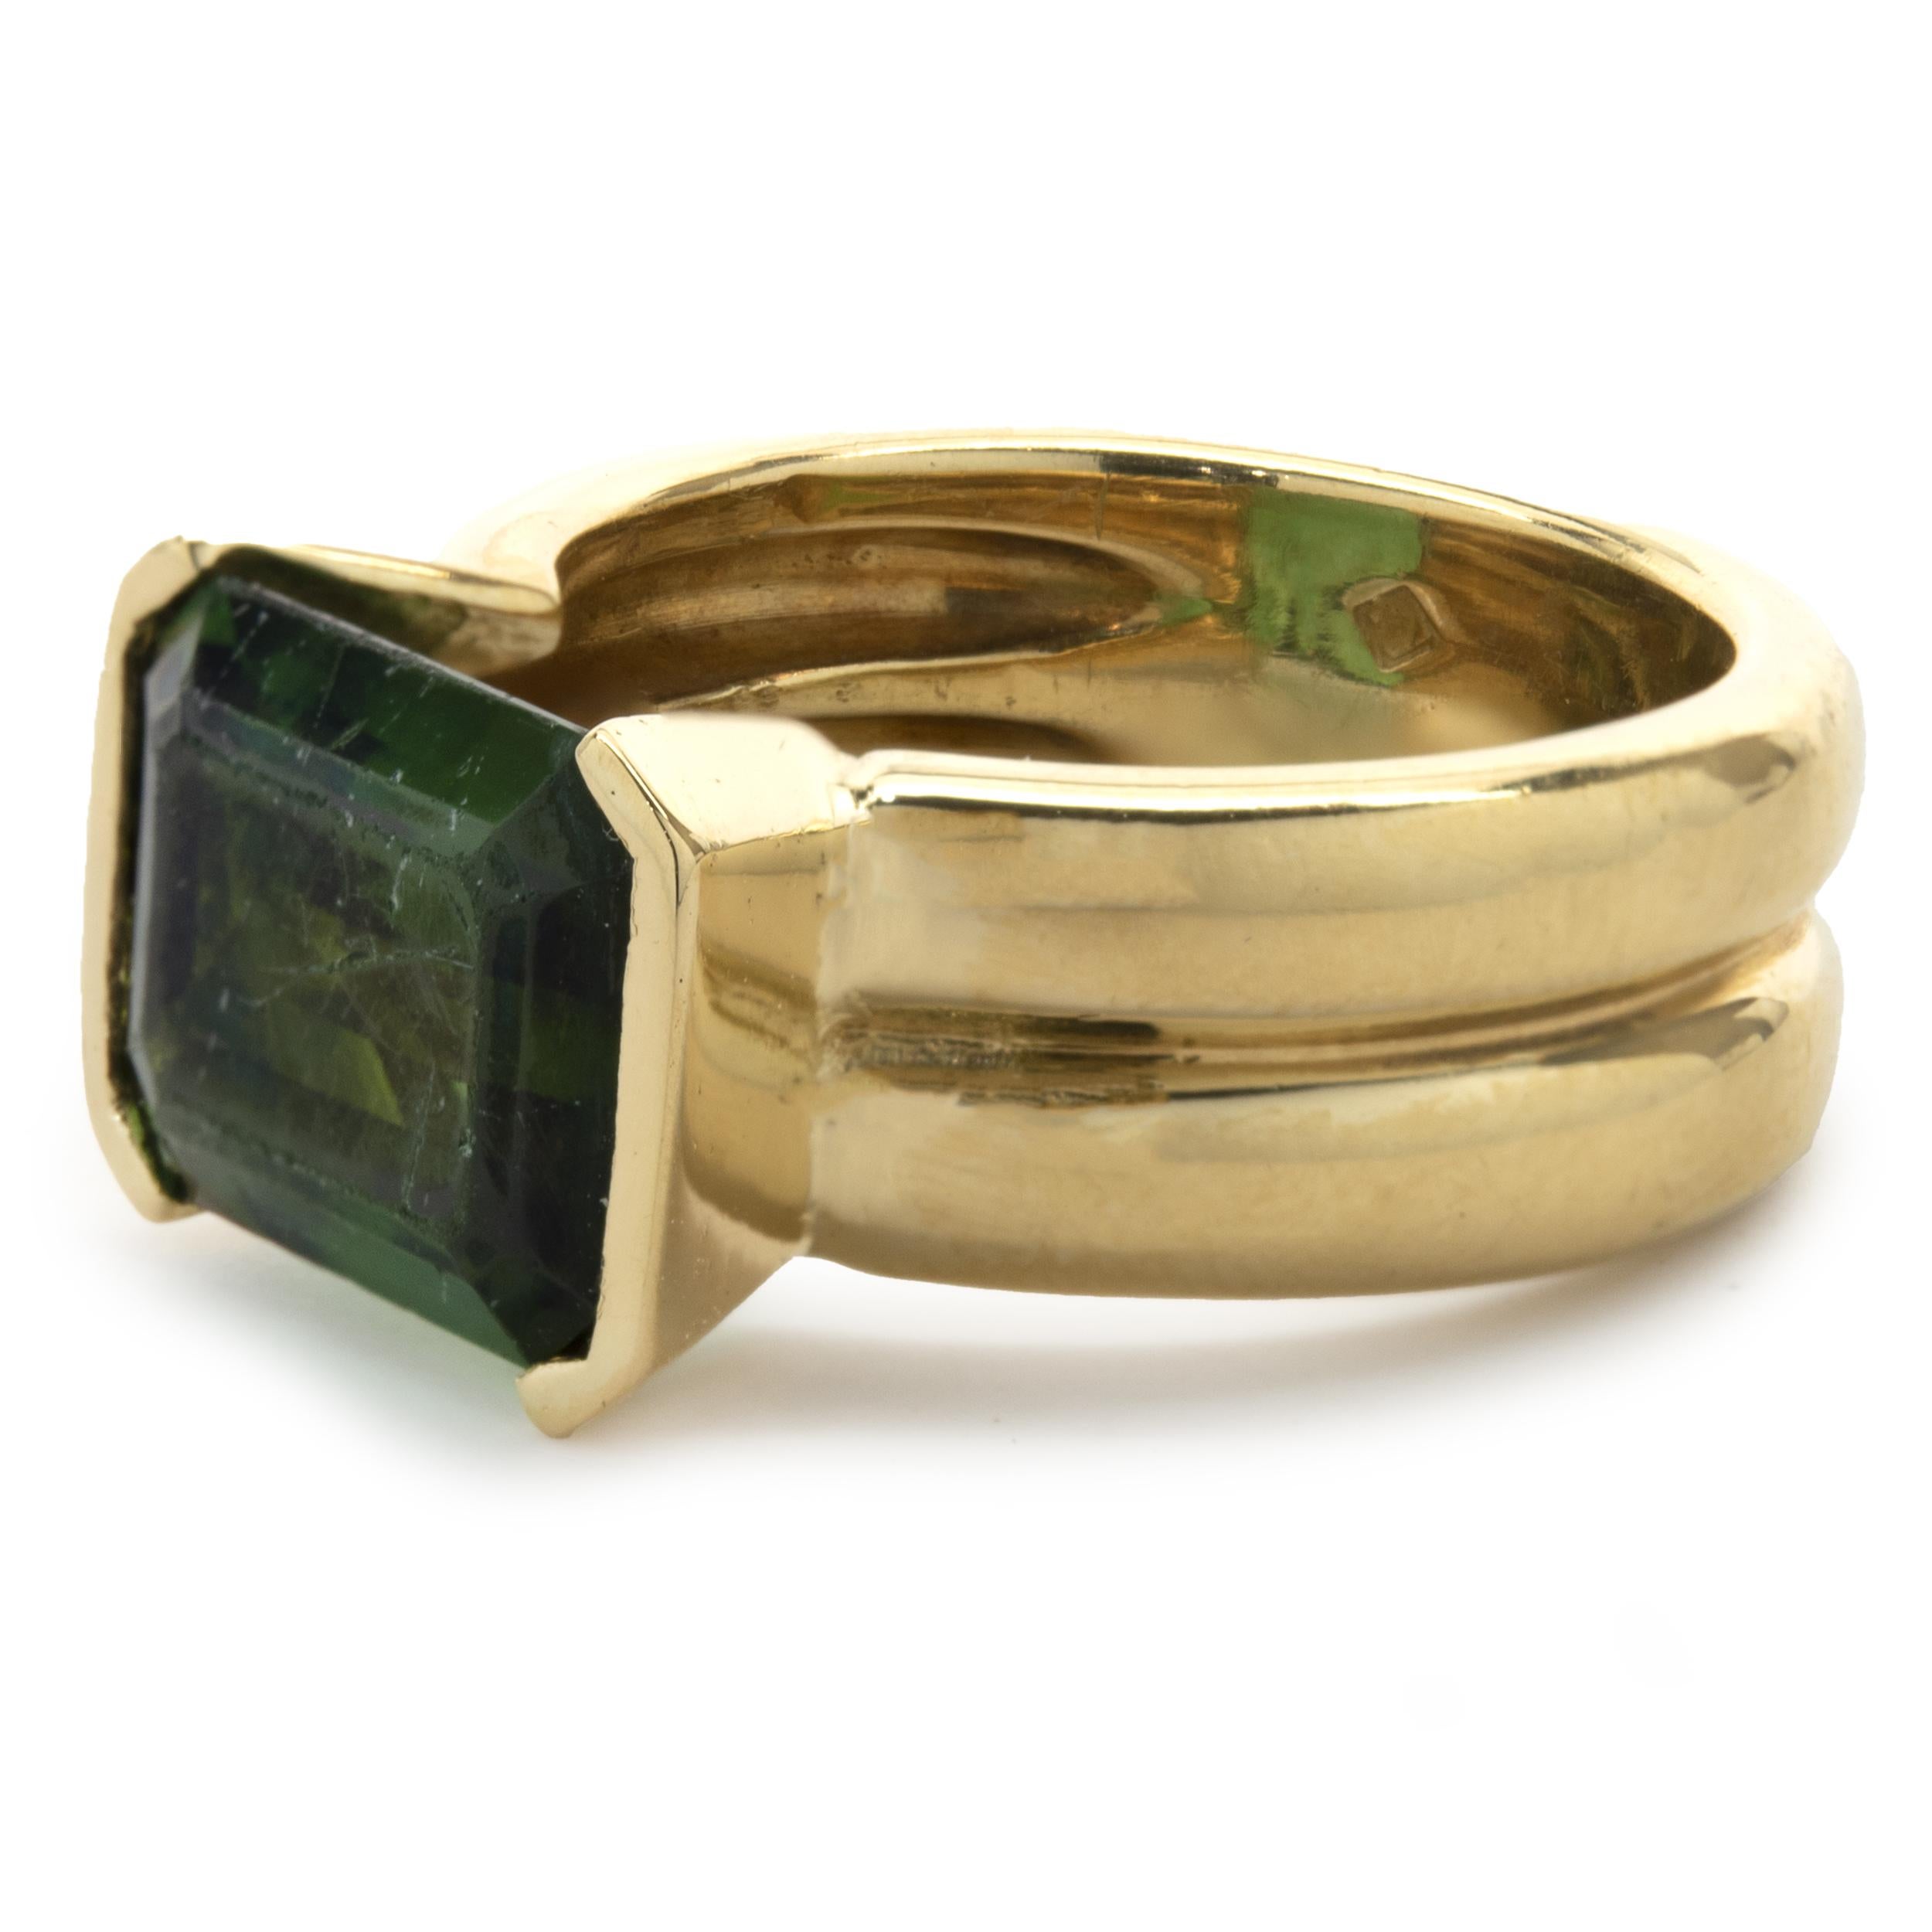 Designer: custom
Material: 18K yellow gold
Green Tourmaline: 1 emerald cut = 4.44ct
Dimensions: ring top measures 10.4mm
Ring Size: 7.5 (complimentary sizing available)
Weight: 12.10 grams
